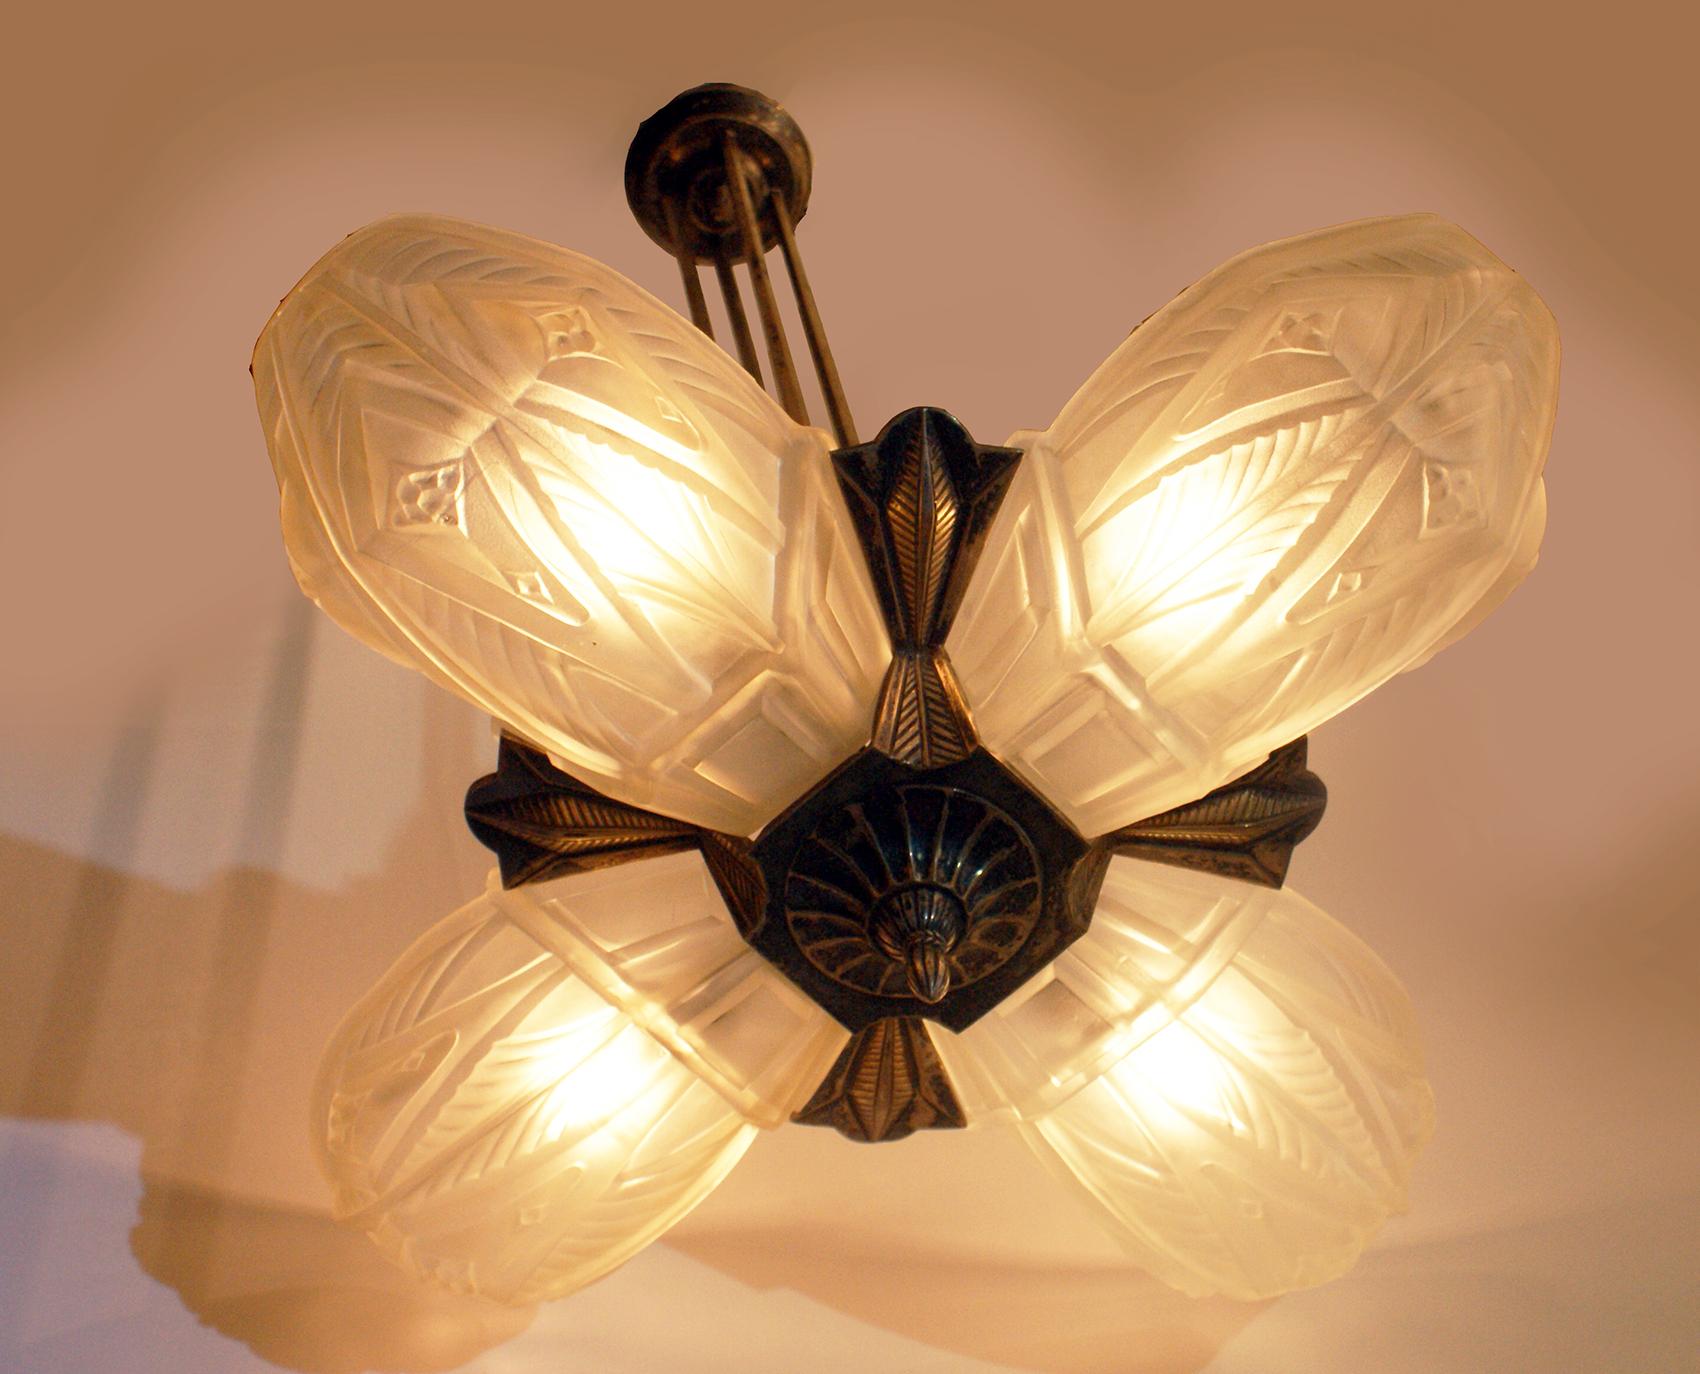 20th Century French Art Deco Chandelier by “Francis Hubens” For Sale